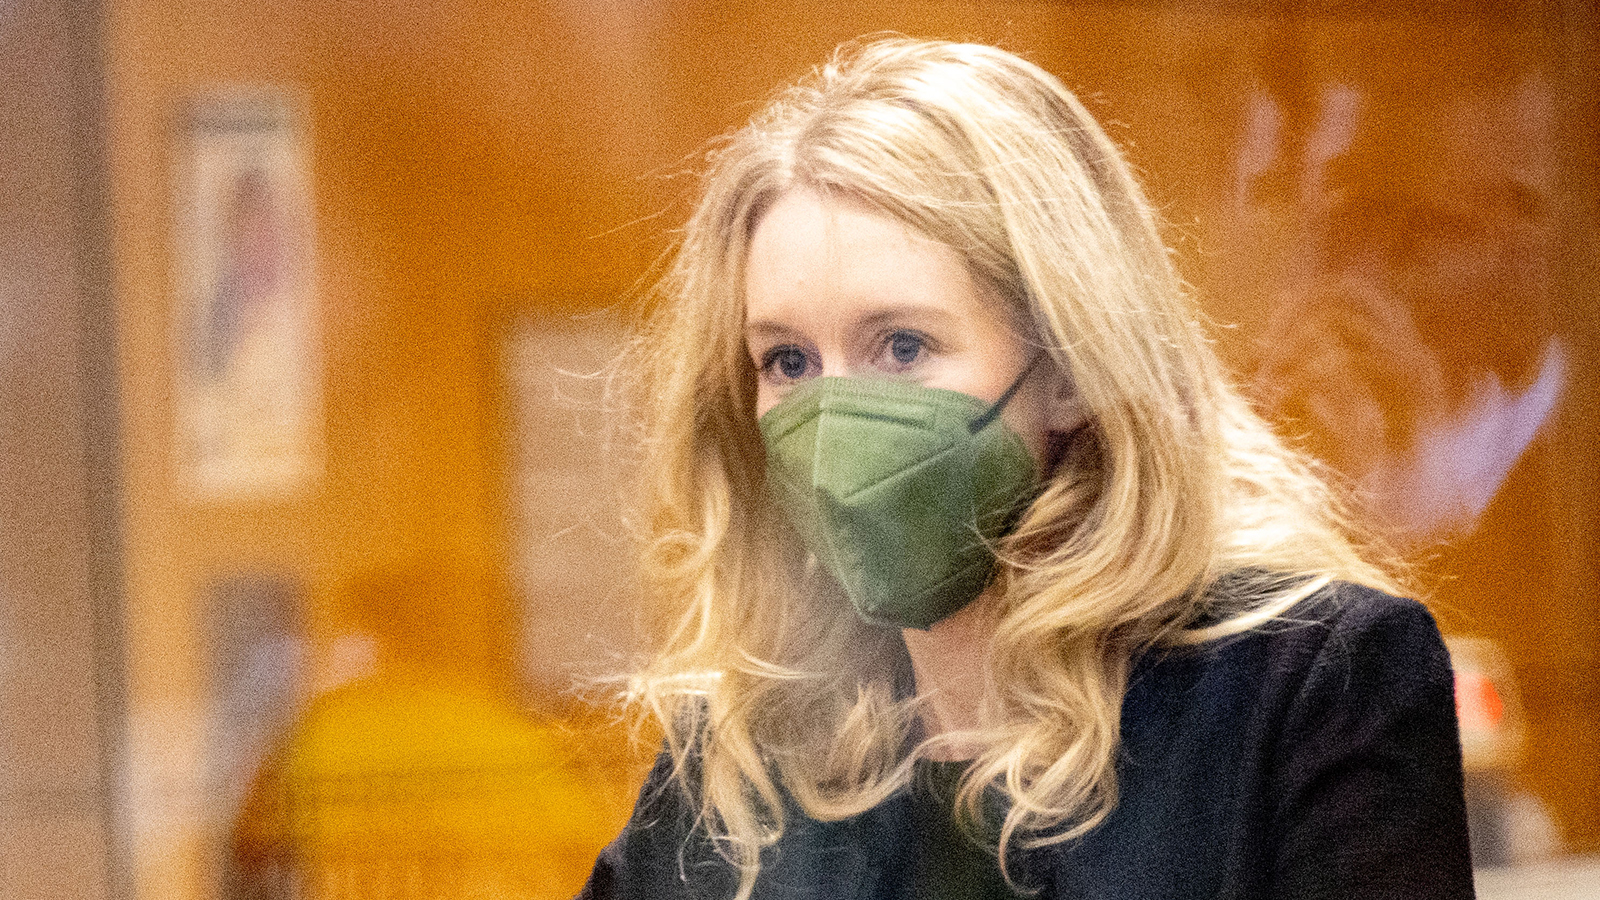 Elizabeth Holmes after going through security during her trial at the Robert F. Peckham Federal Building November 23, 2021 in San Jose, California.